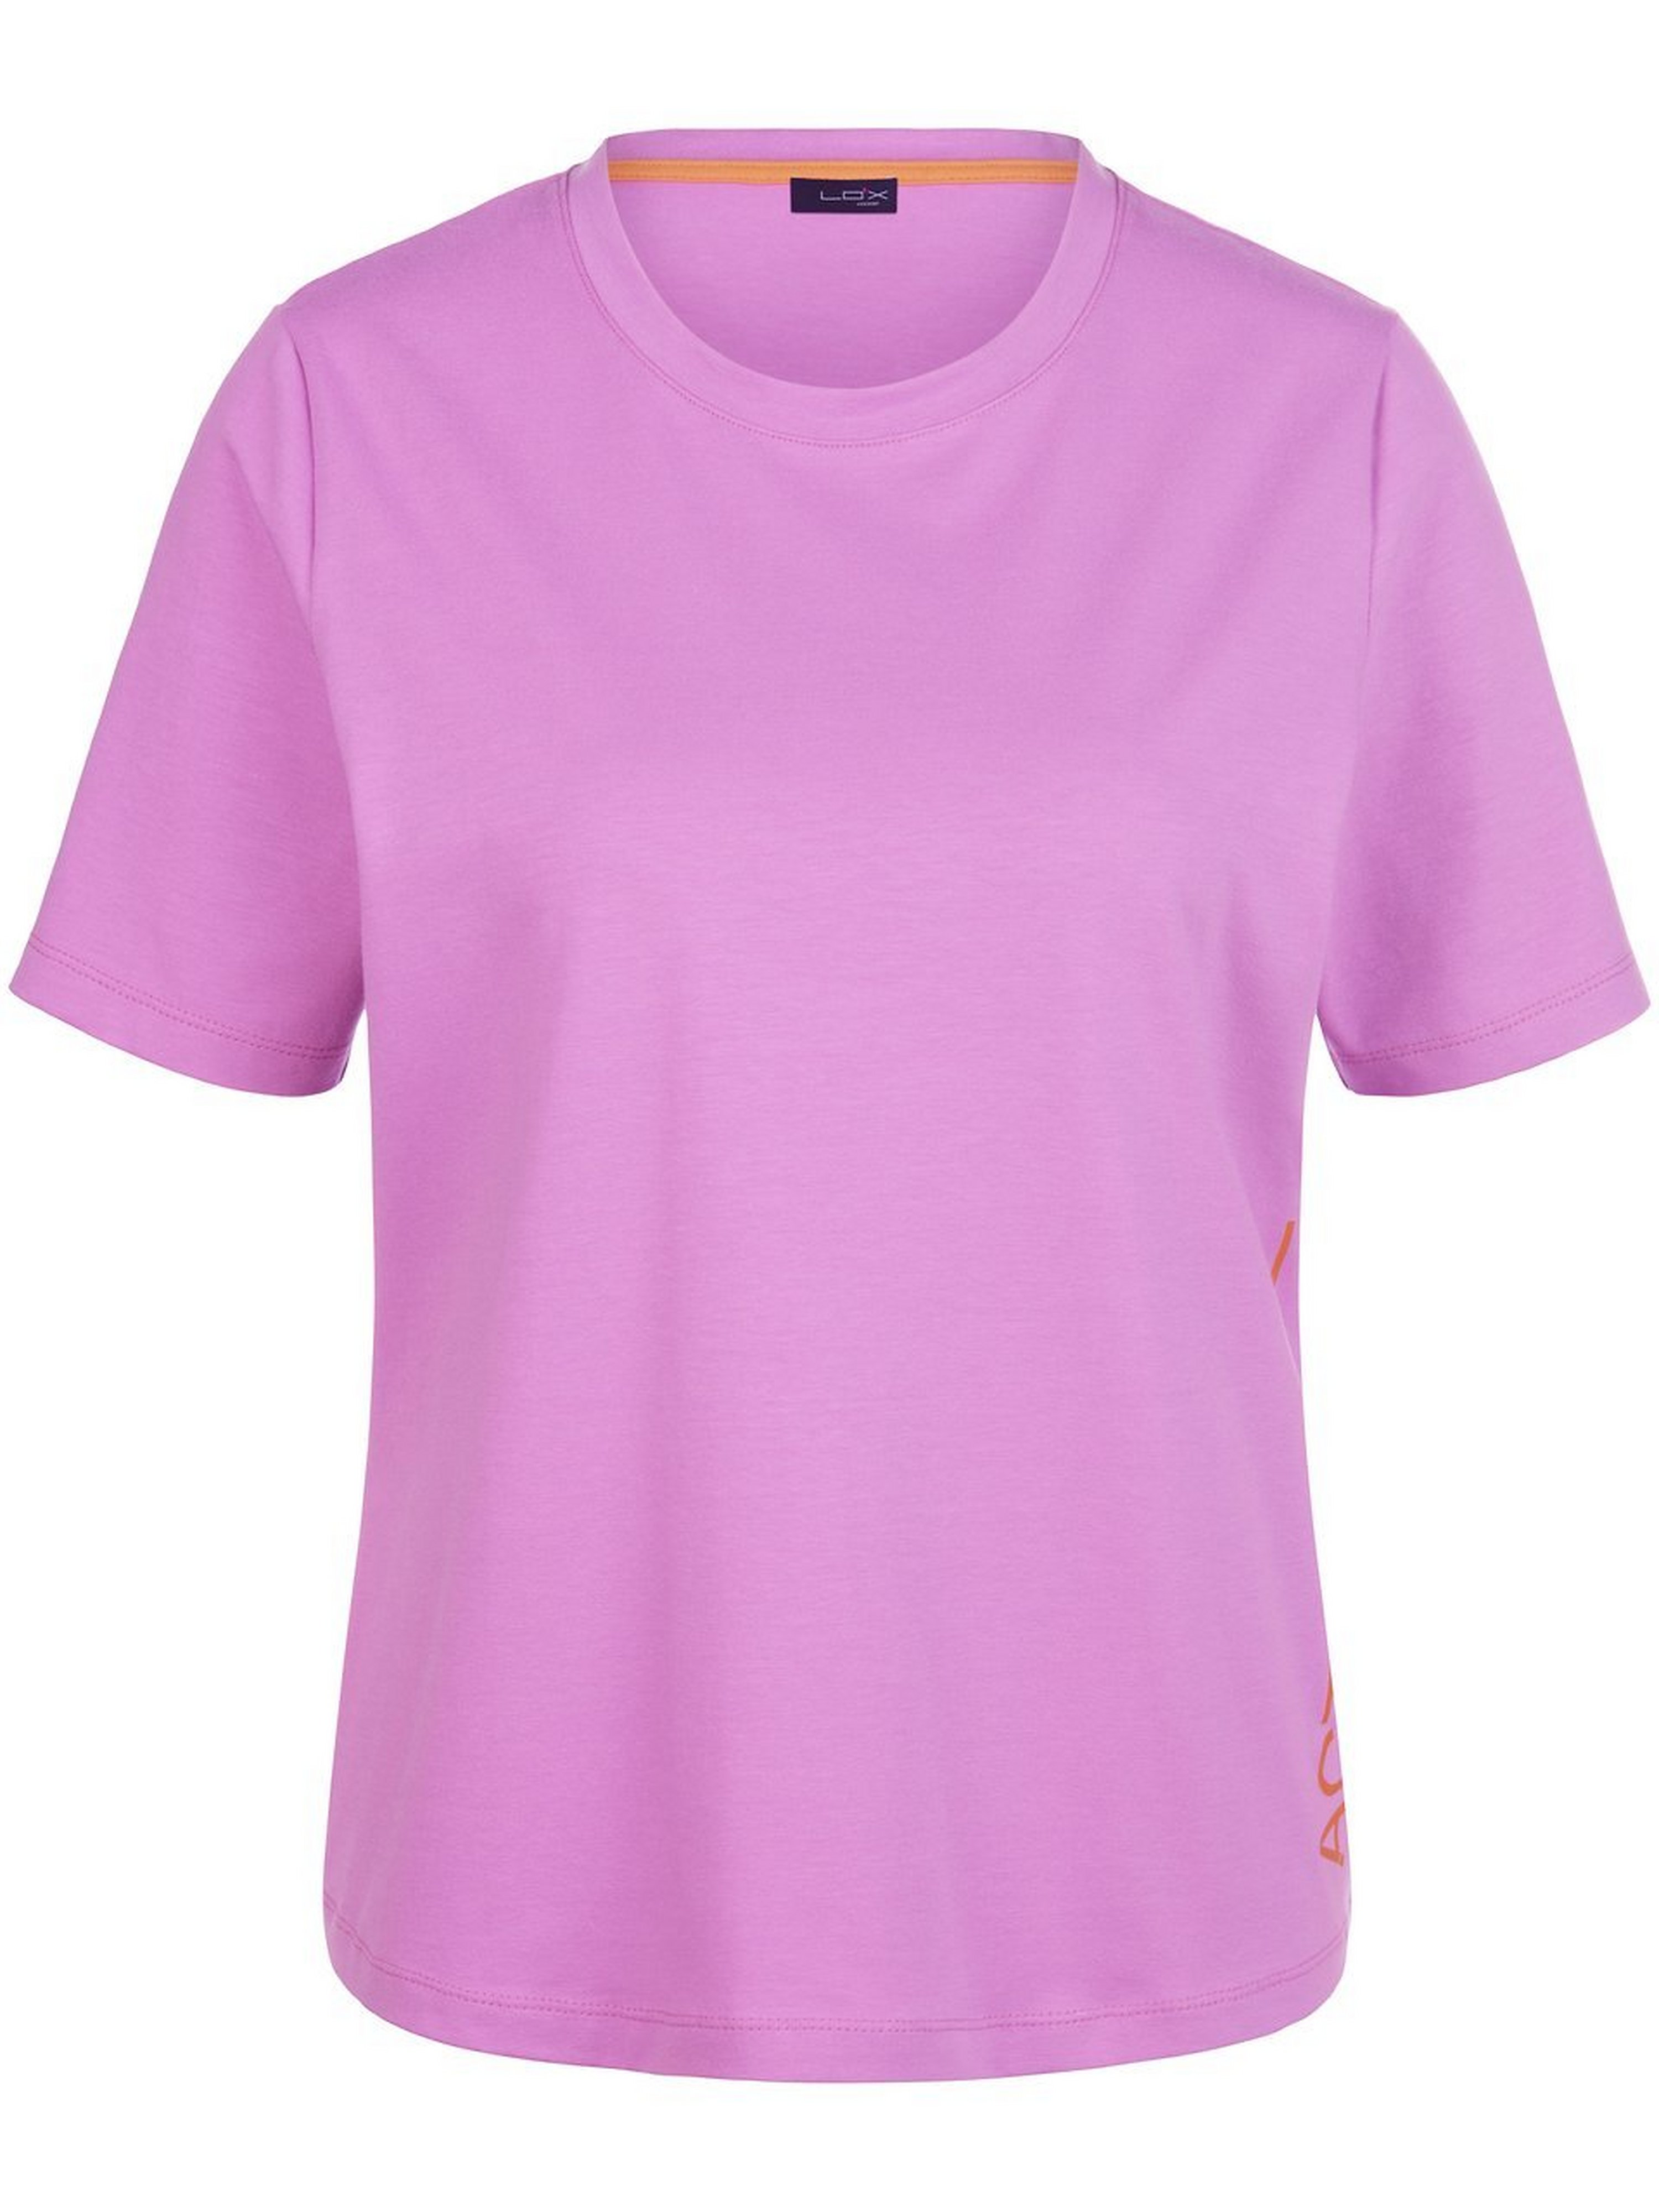 Le T-shirt manches courtes  Looxent fuchsia taille 44